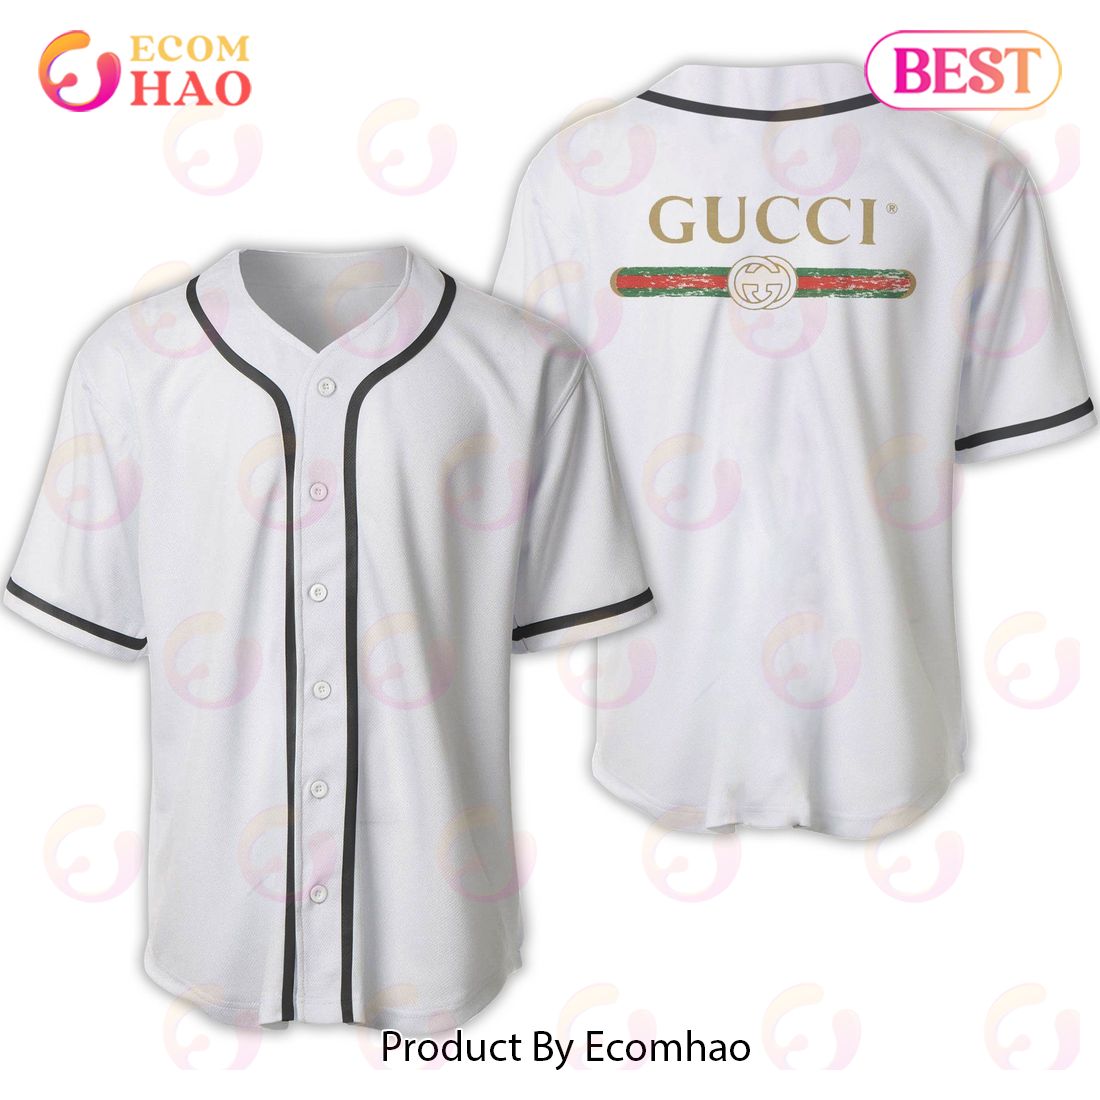 Gucci Full White Color Luxury Brand Jersey Limited Edition